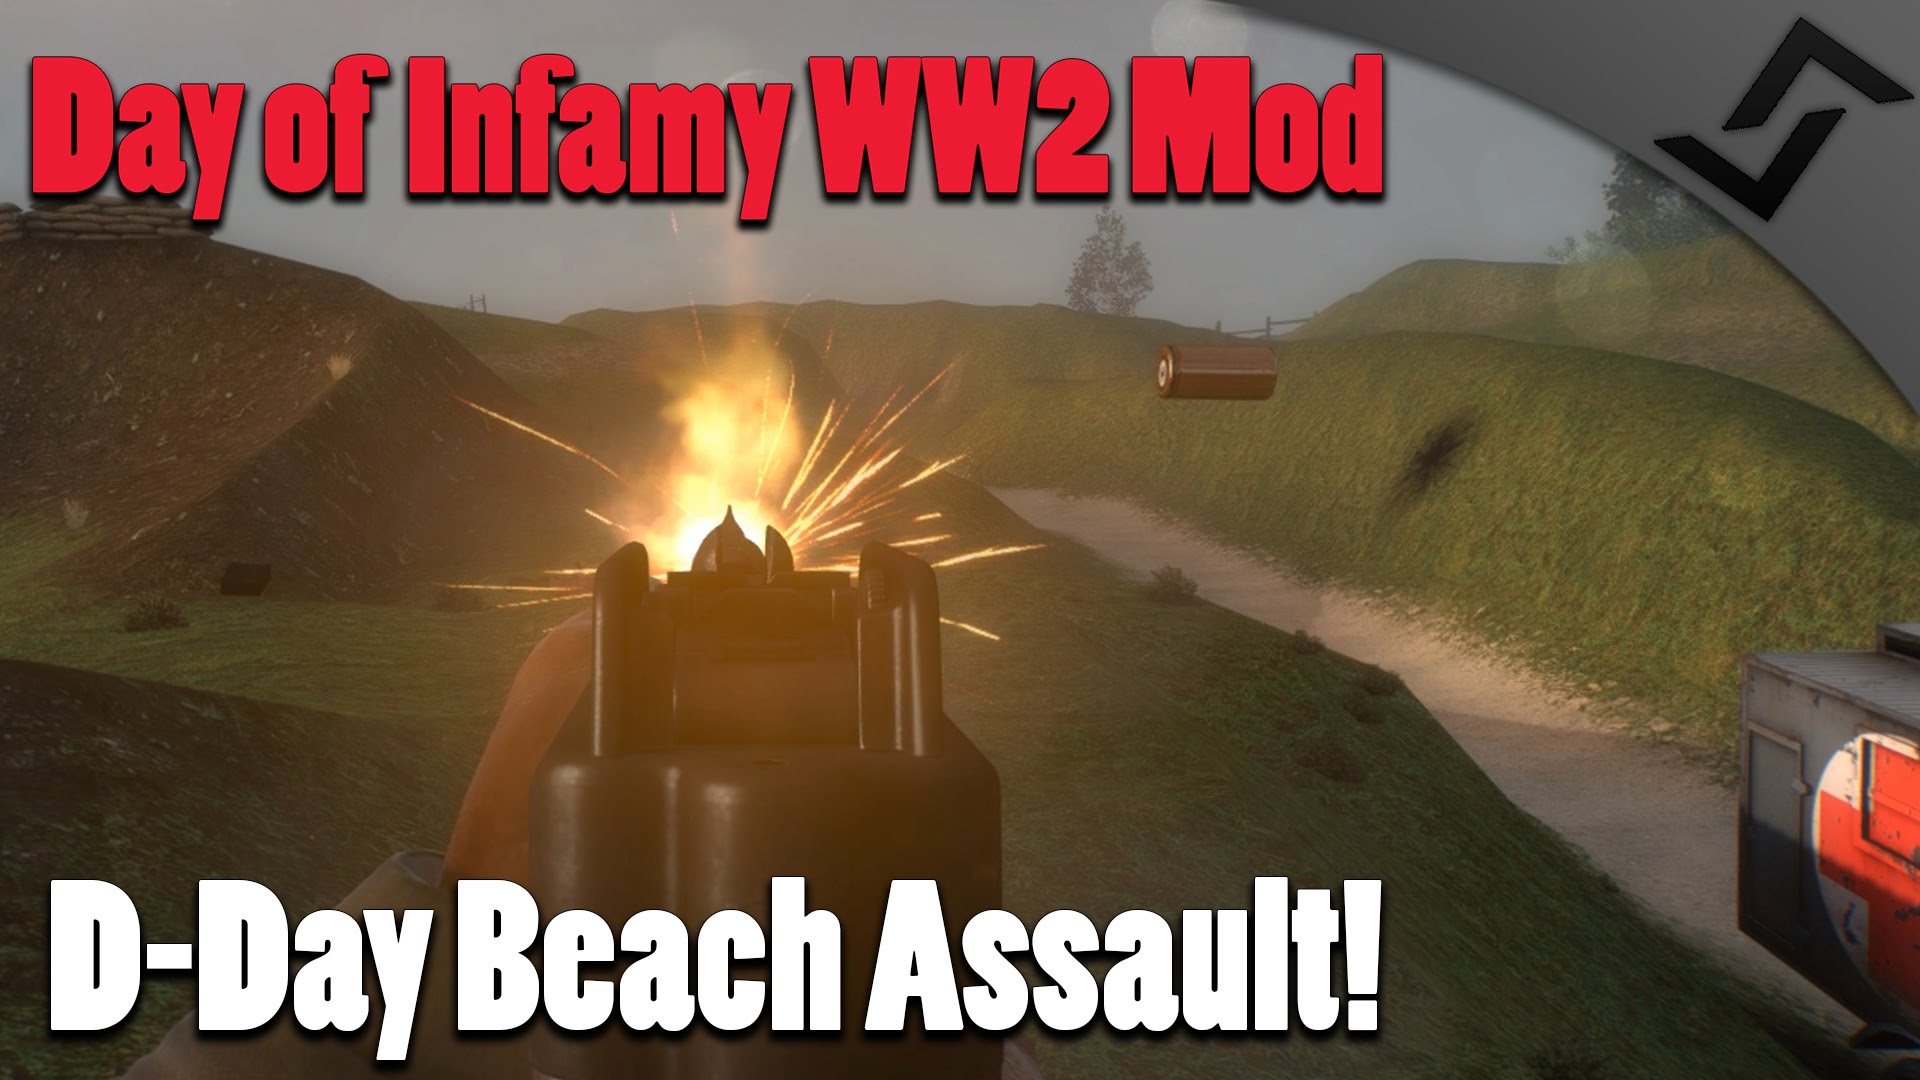 Day of Infamy – D-Day Beach Assault – World War 2 Insurgency Mod – Thompson SMG and Bazooka Gameplay